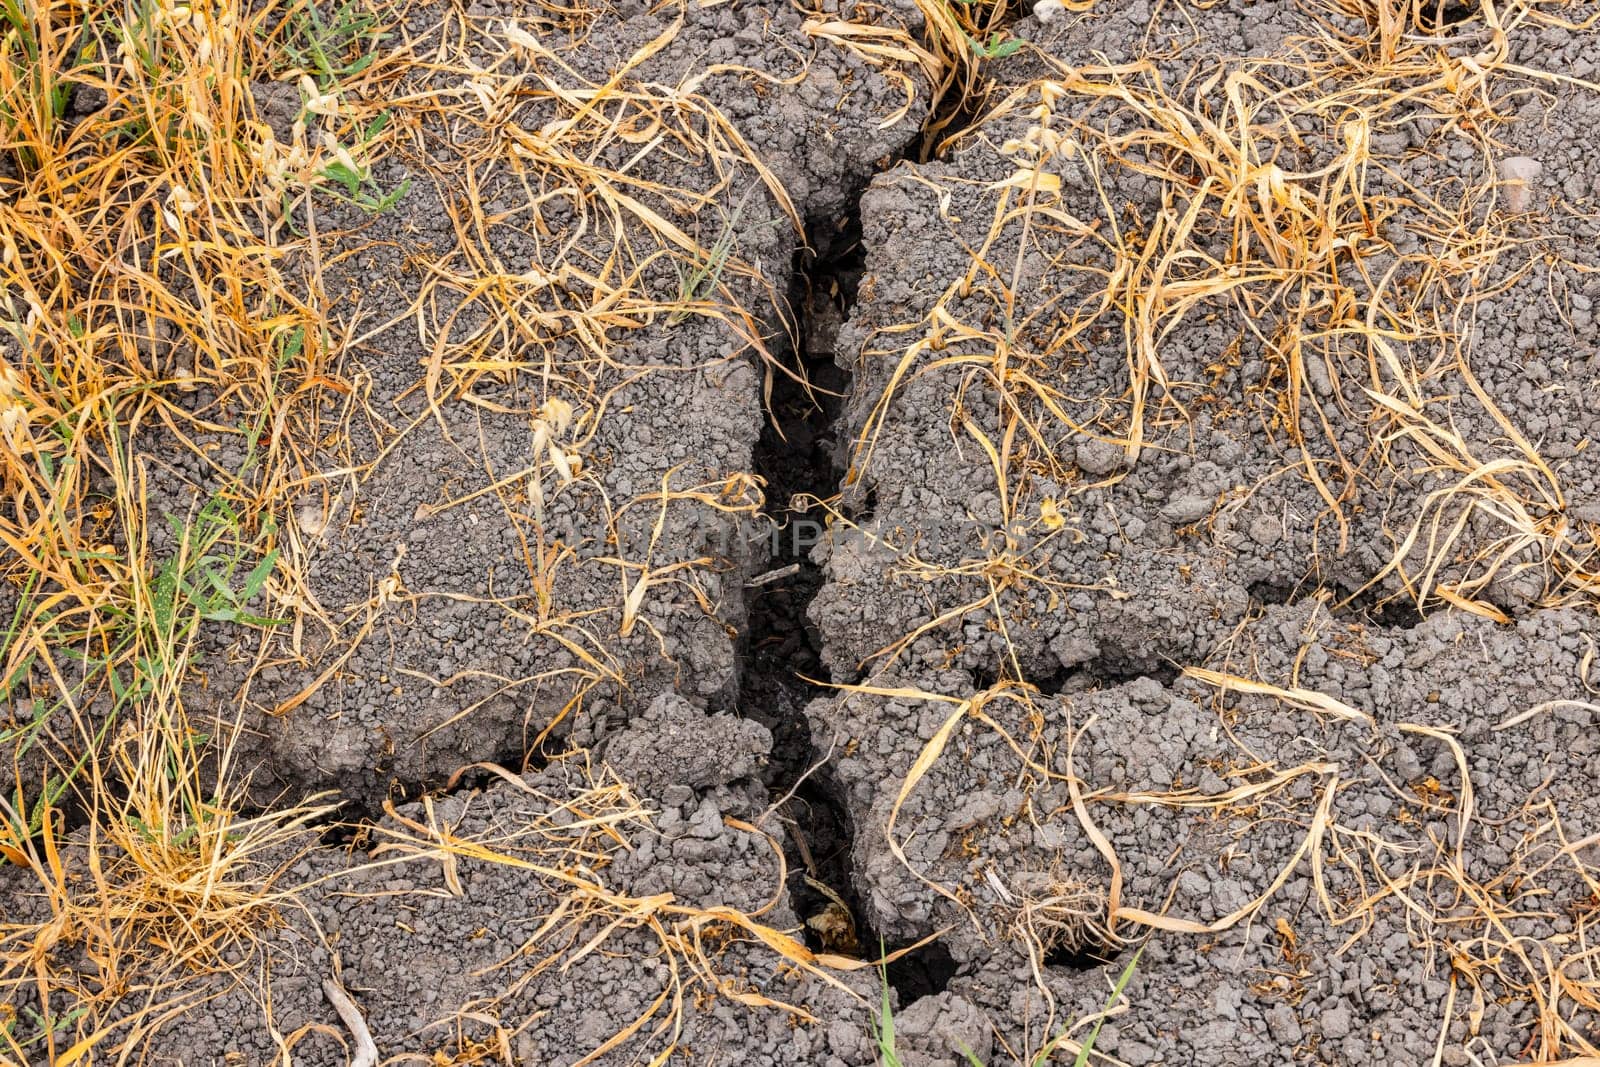 Cracks and fissures in the soil of an agricultural field due to drought and water shortage in the change of climate in crisis